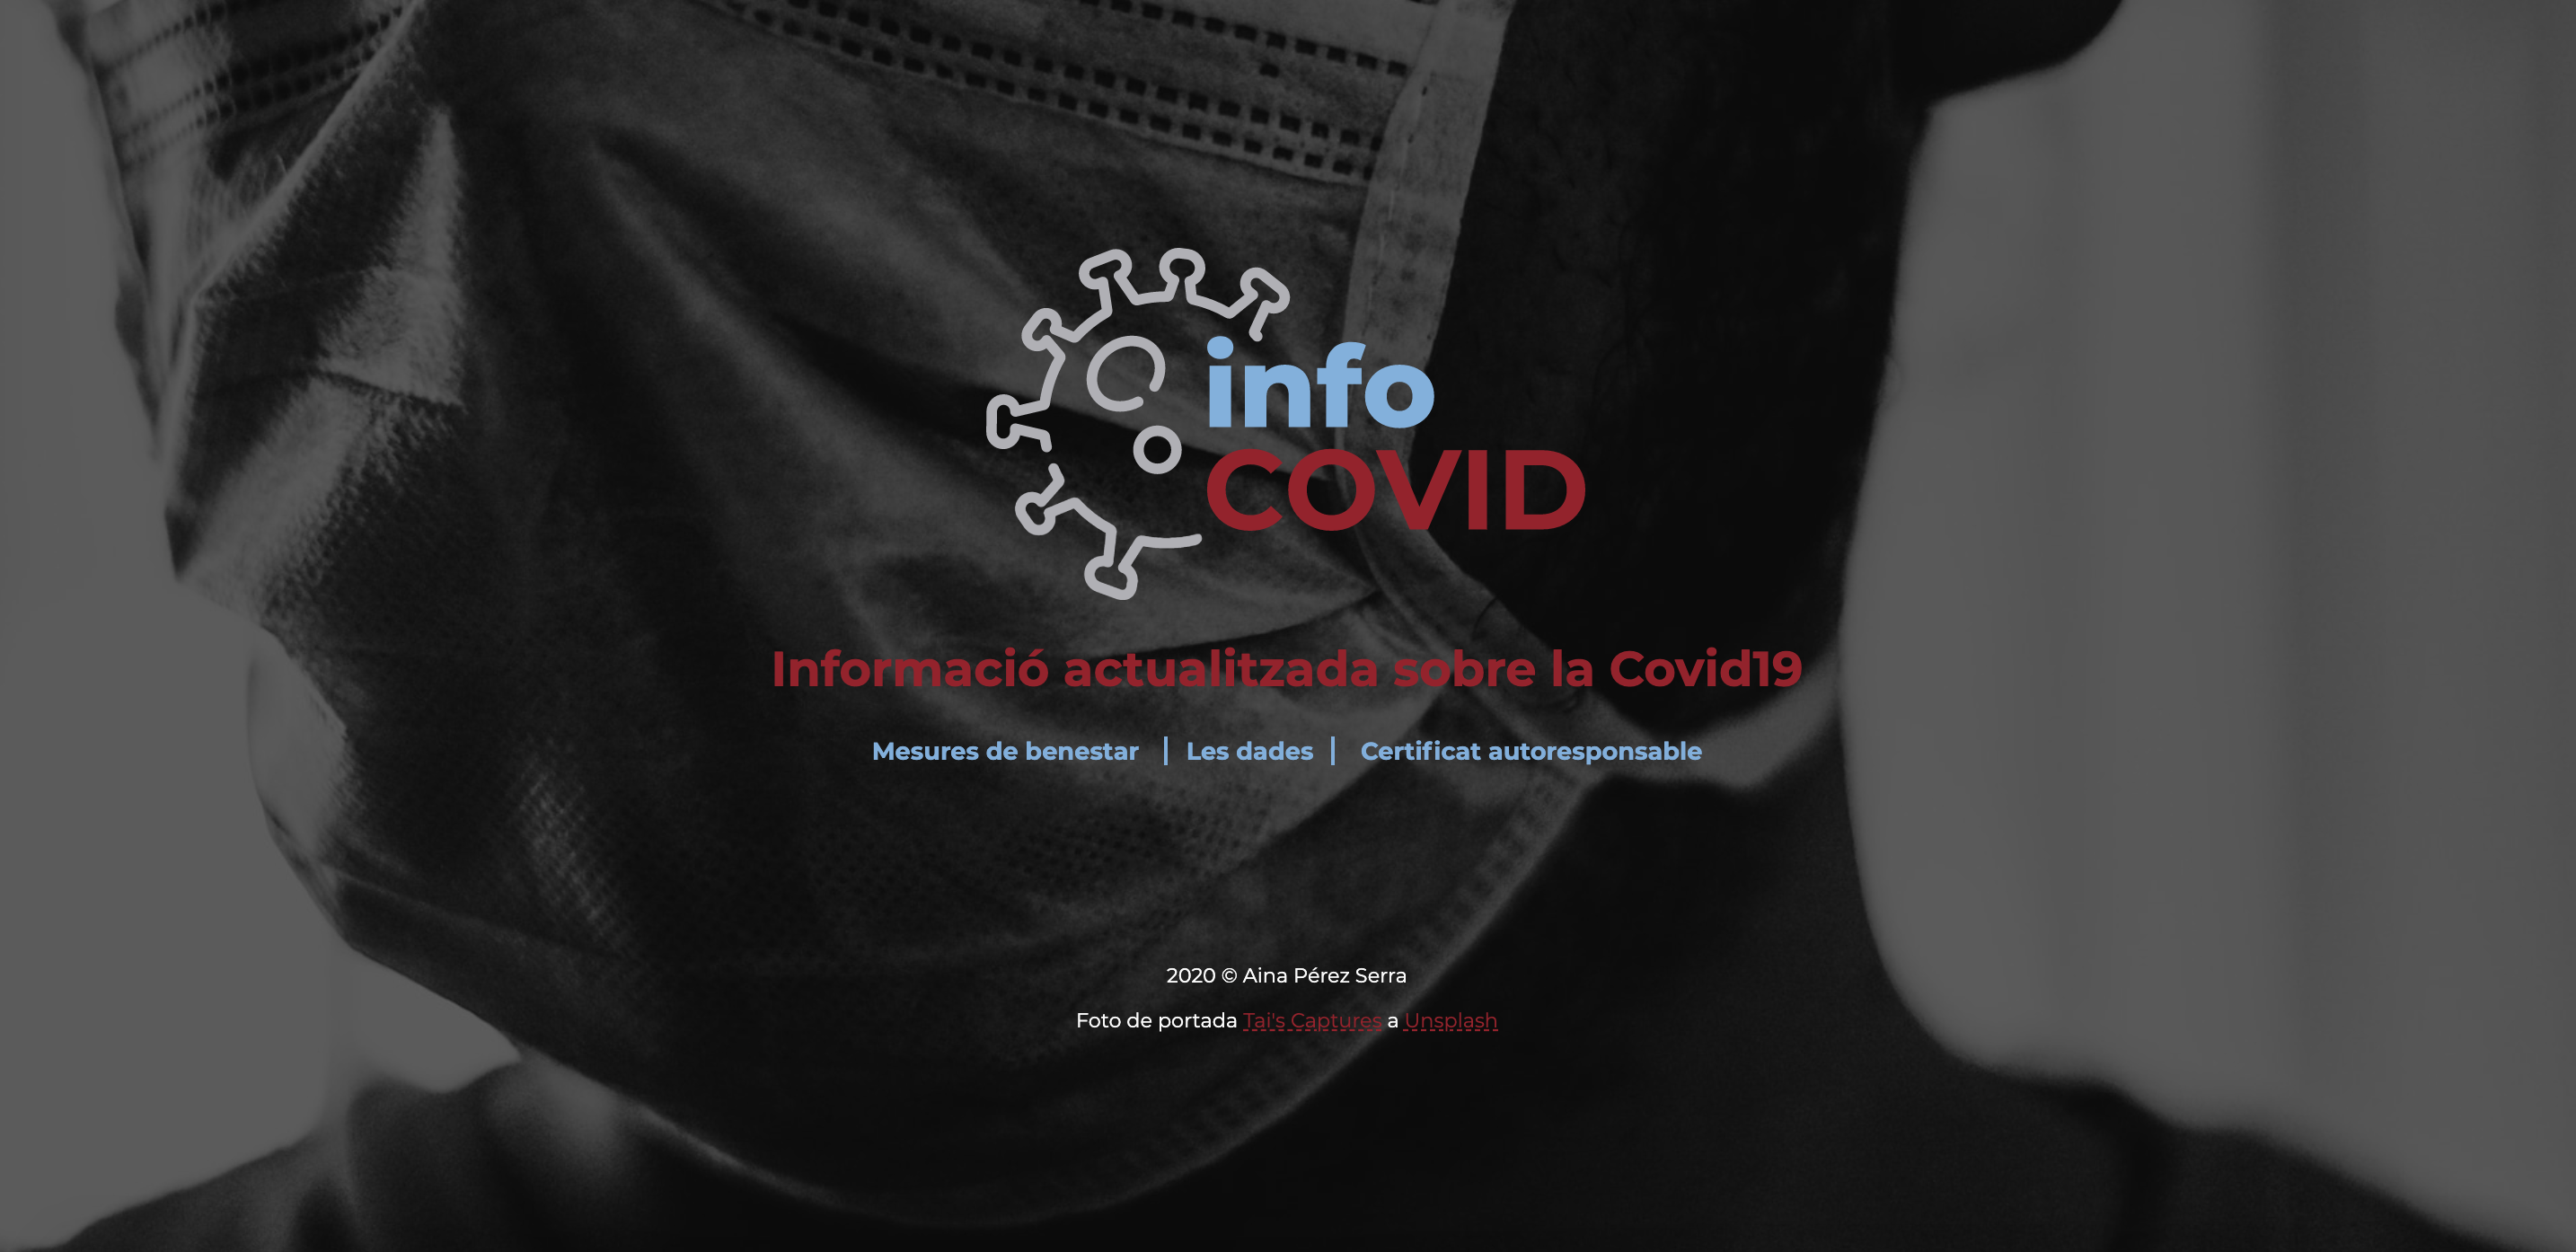 Covid info website snippet